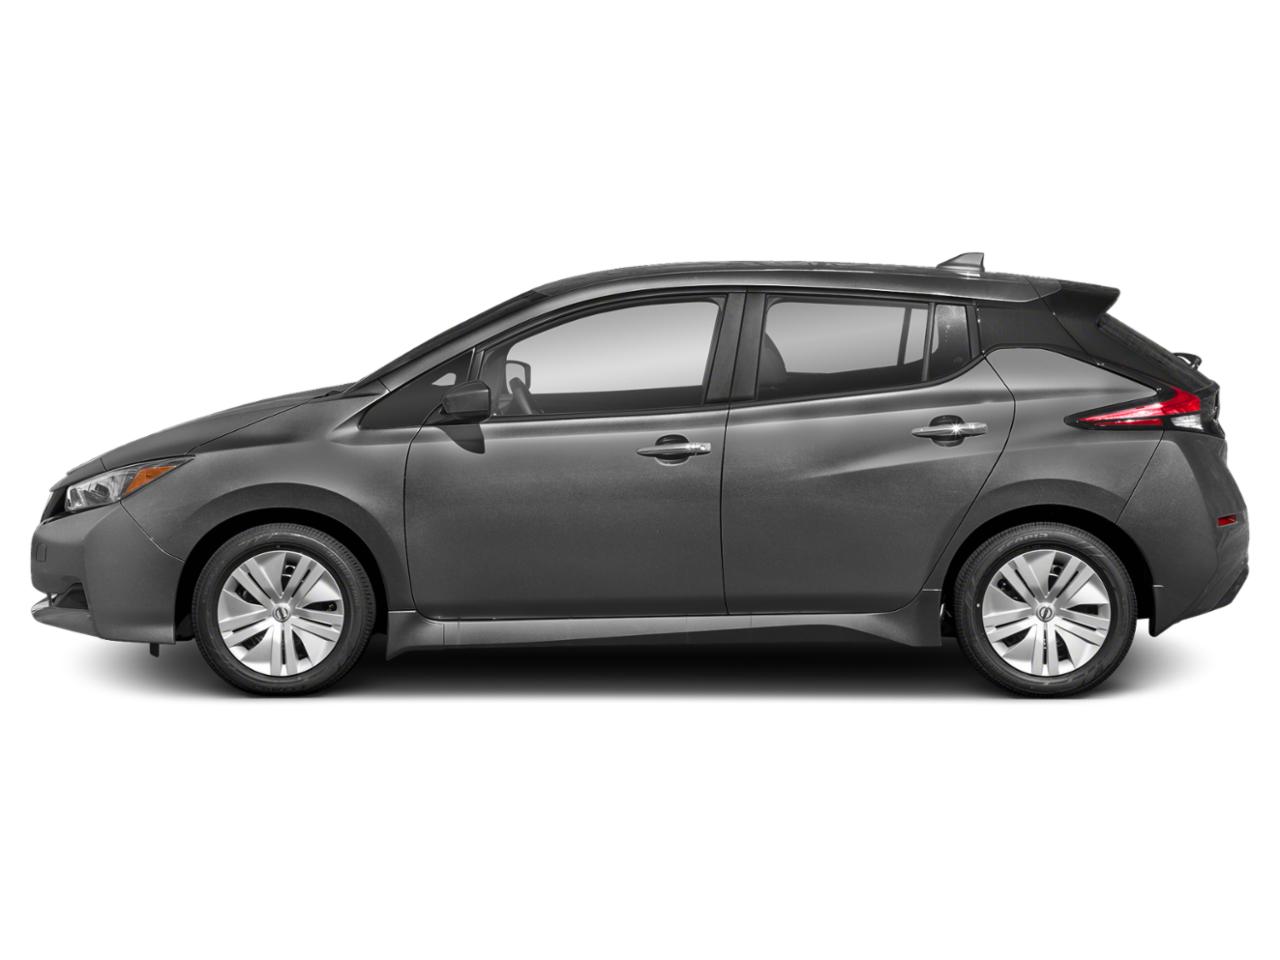 Used 2019 Nissan Leaf SV Plus with VIN 1N4BZ1CP8KC319005 for sale in Albuquerque, NM